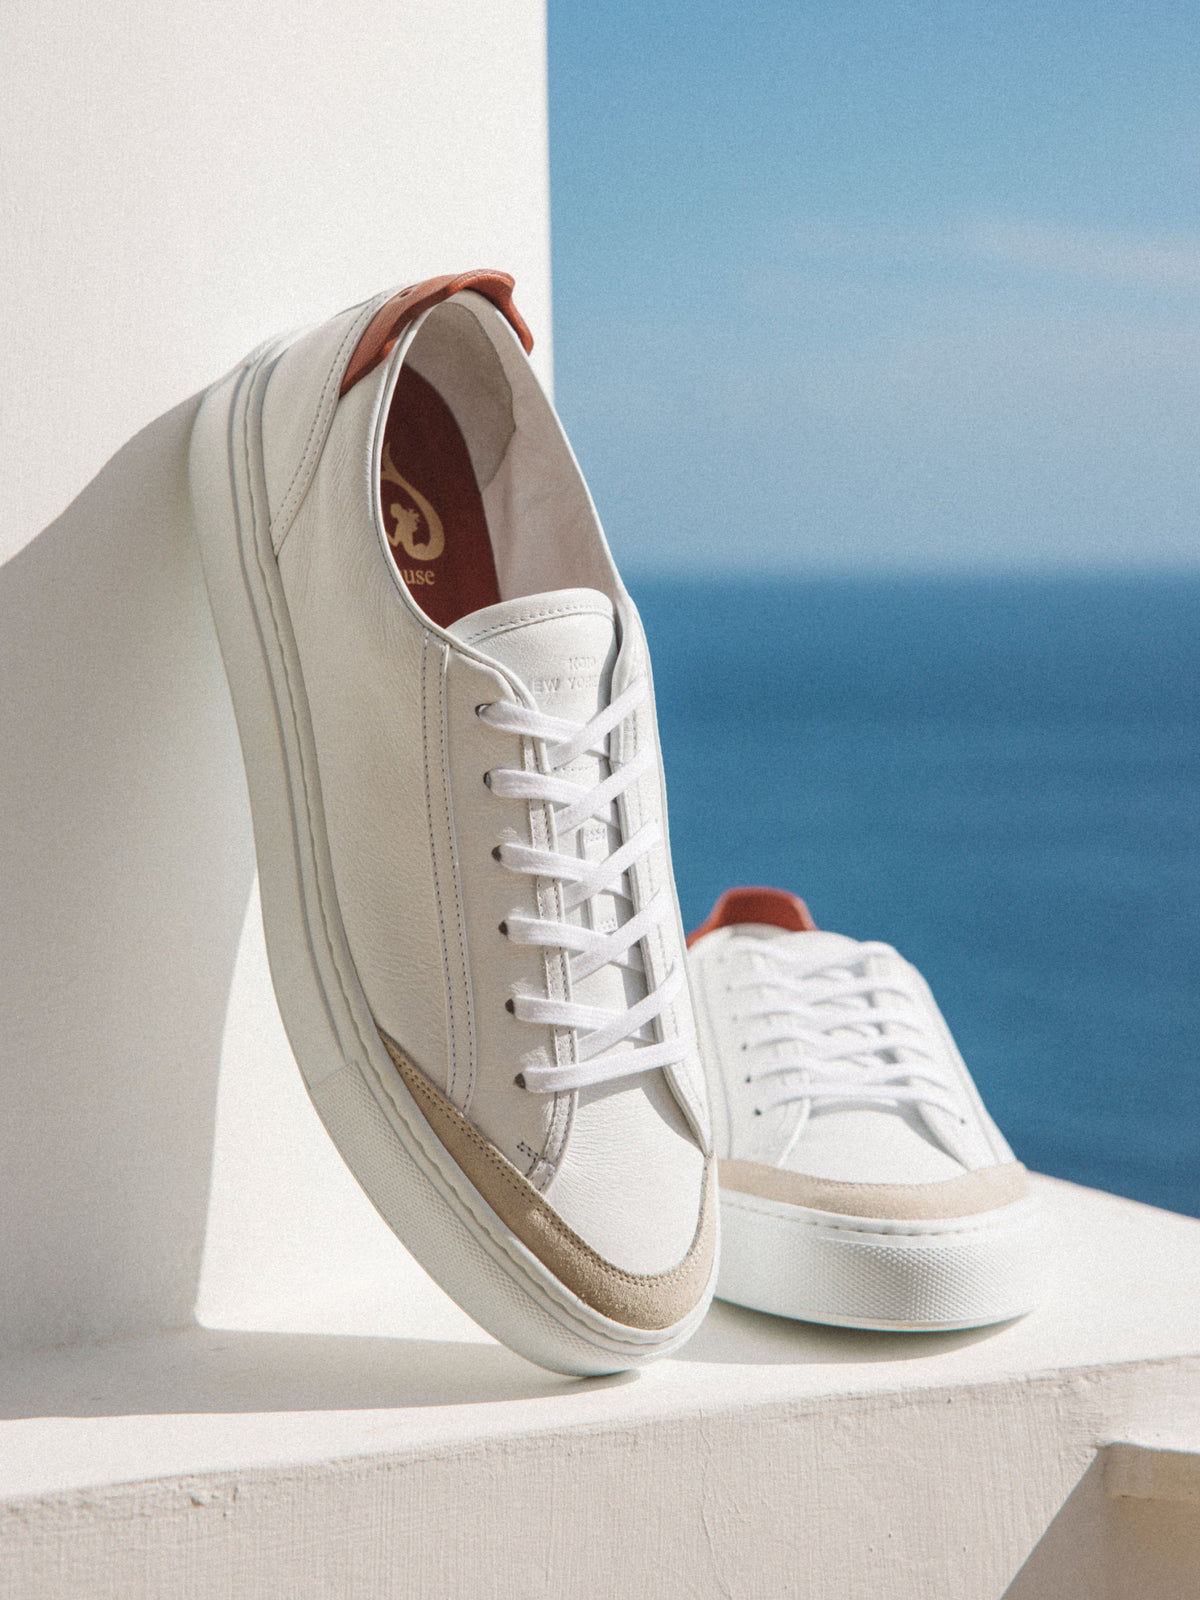 Koio | Handcrafted Italian Leather Sneakers – Koio